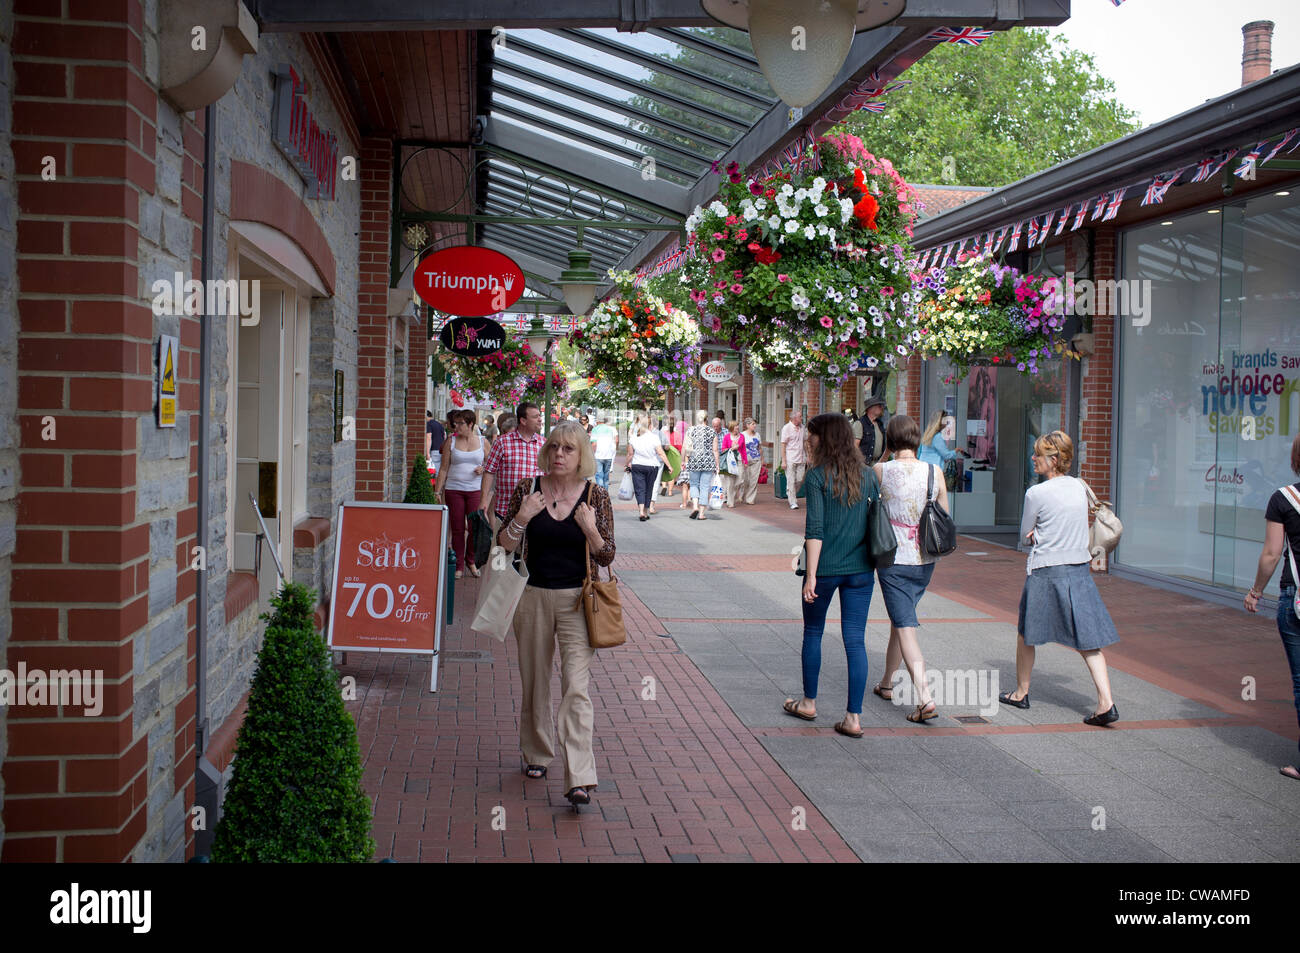 Clarks Village Outlet Shopping a Street Foto stock - Alamy